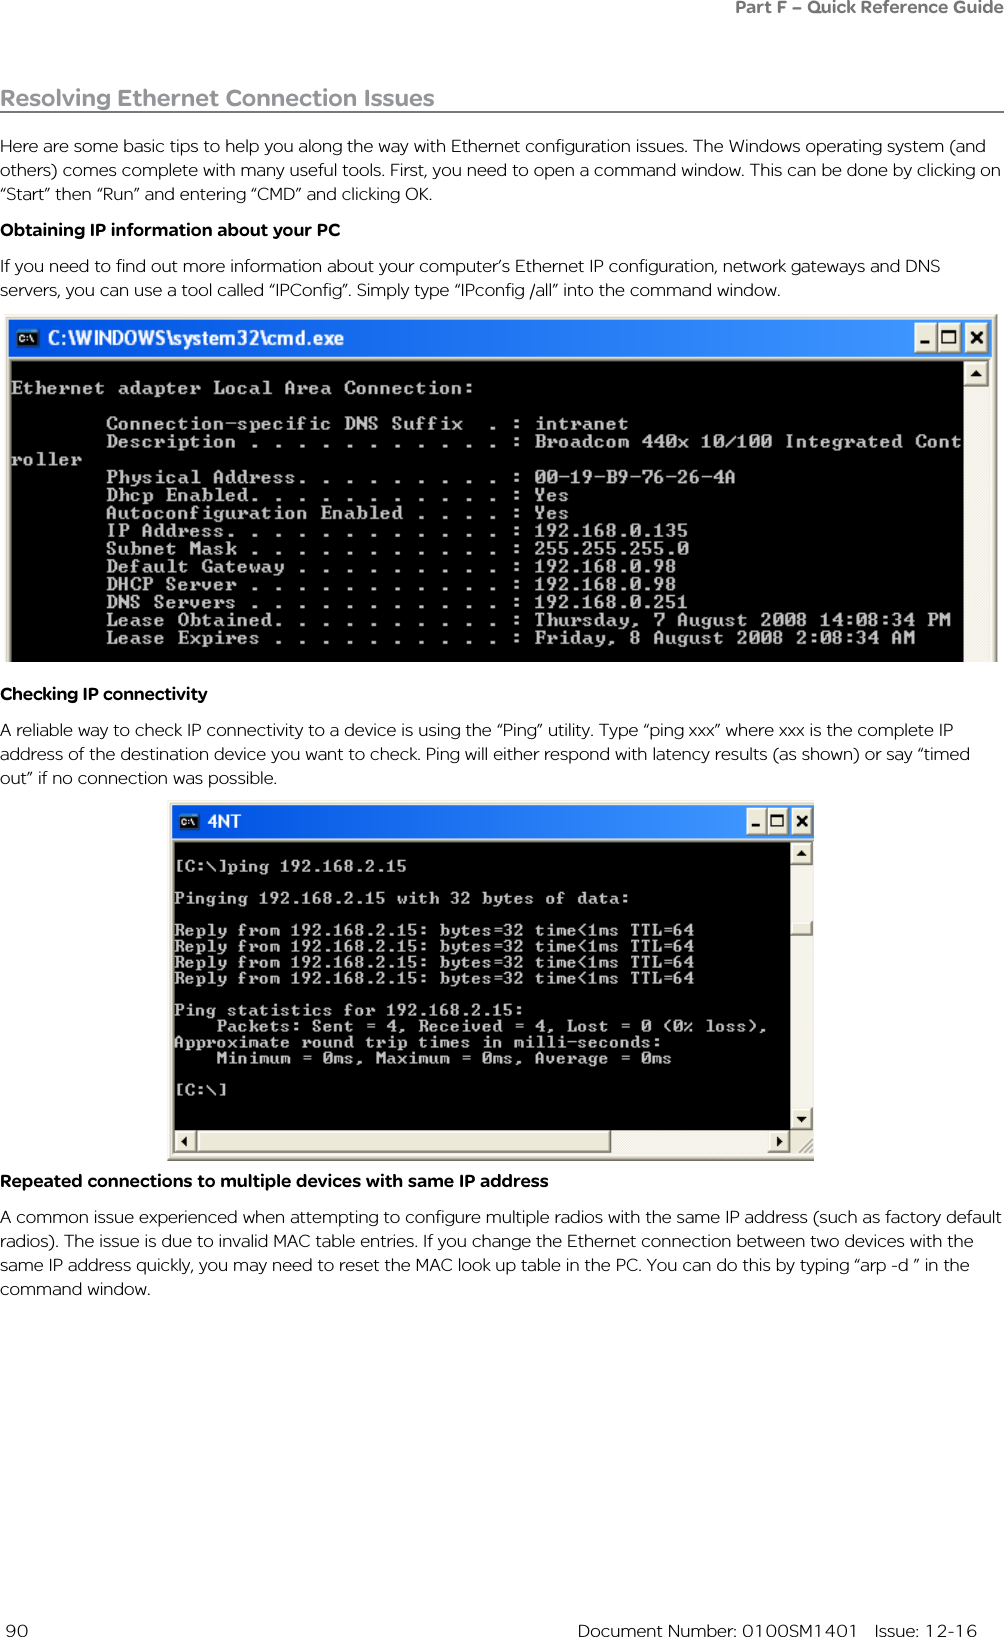  90  Document Number: 0100SM1401   Issue: 12-16Resolving Ethernet Connection IssuesHere are some basic tips to help you along the way with Ethernet configuration issues. The Windows operating system (and others) comes complete with many useful tools. First, you need to open a command window. This can be done by clicking on “Start” then “Run” and entering “CMD” and clicking OK. Obtaining IP information about your PCIf you need to find out more information about your computer’s Ethernet IP configuration, network gateways and DNS servers, you can use a tool called “IPConfig”. Simply type “IPconfig /all” into the command window.Checking IP connectivityA reliable way to check IP connectivity to a device is using the “Ping” utility. Type “ping xxx” where xxx is the complete IP address of the destination device you want to check. Ping will either respond with latency results (as shown) or say “timed out” if no connection was possible.  Repeated connections to multiple devices with same IP addressA common issue experienced when attempting to configure multiple radios with the same IP address (such as factory default radios). The issue is due to invalid MAC table entries. If you change the Ethernet connection between two devices with the same IP address quickly, you may need to reset the MAC look up table in the PC. You can do this by typing “arp -d ” in the command window. Part F – Quick Reference Guide